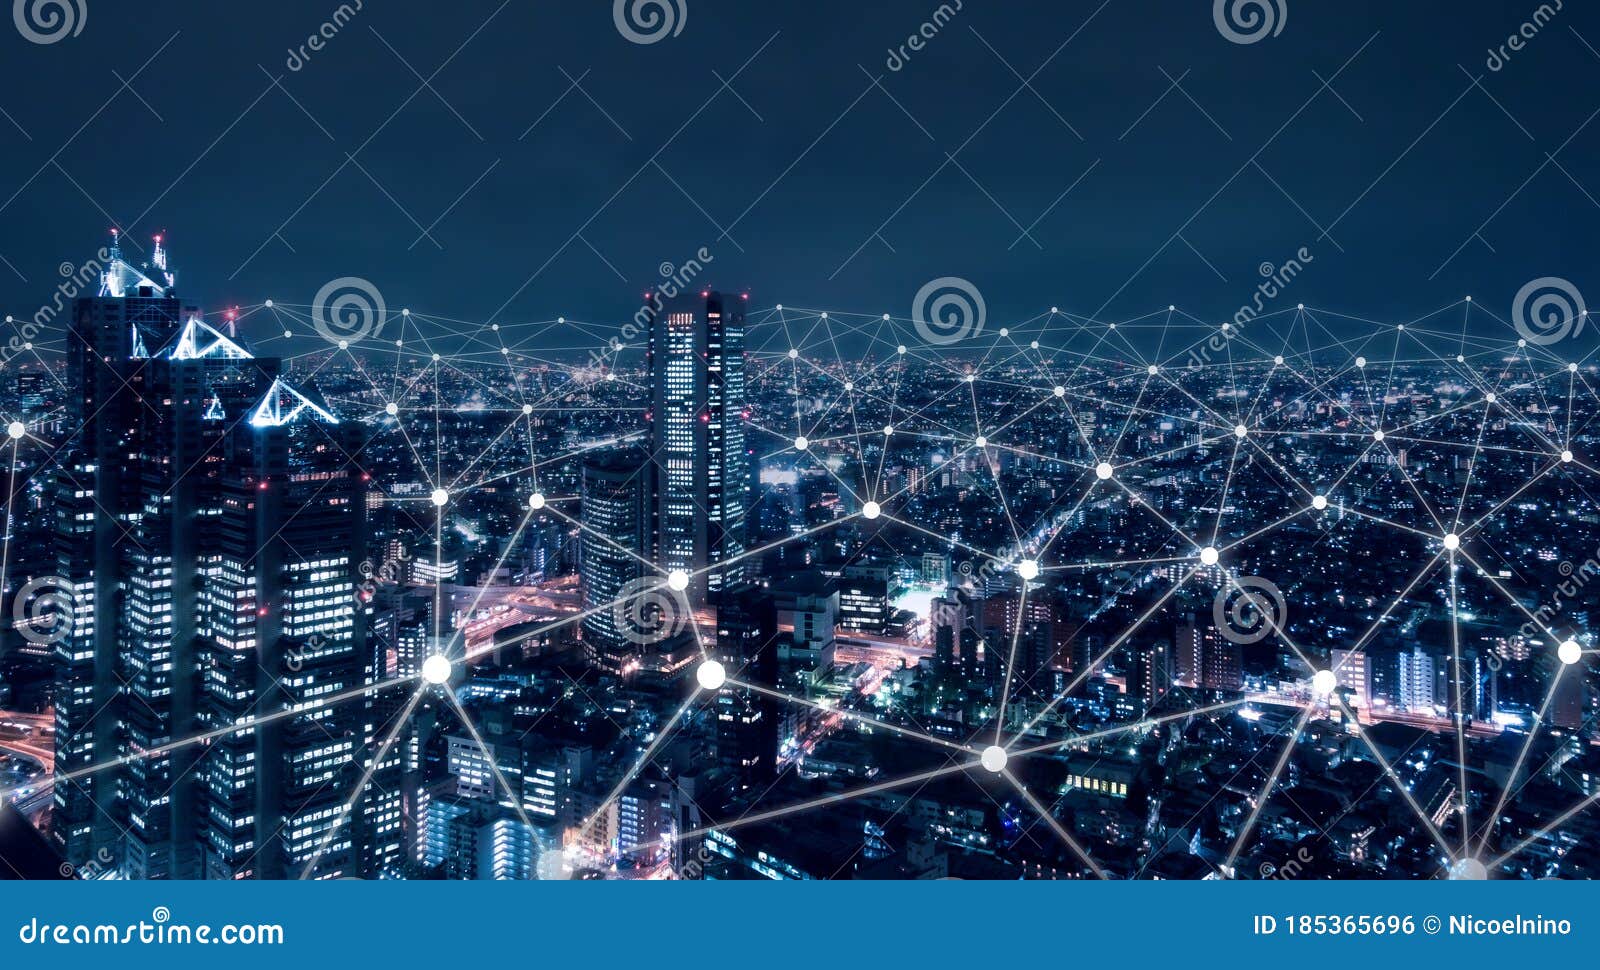 telecommunication network above city, wireless mobile internet technology for smart grid or 5g lte data connection, concept about